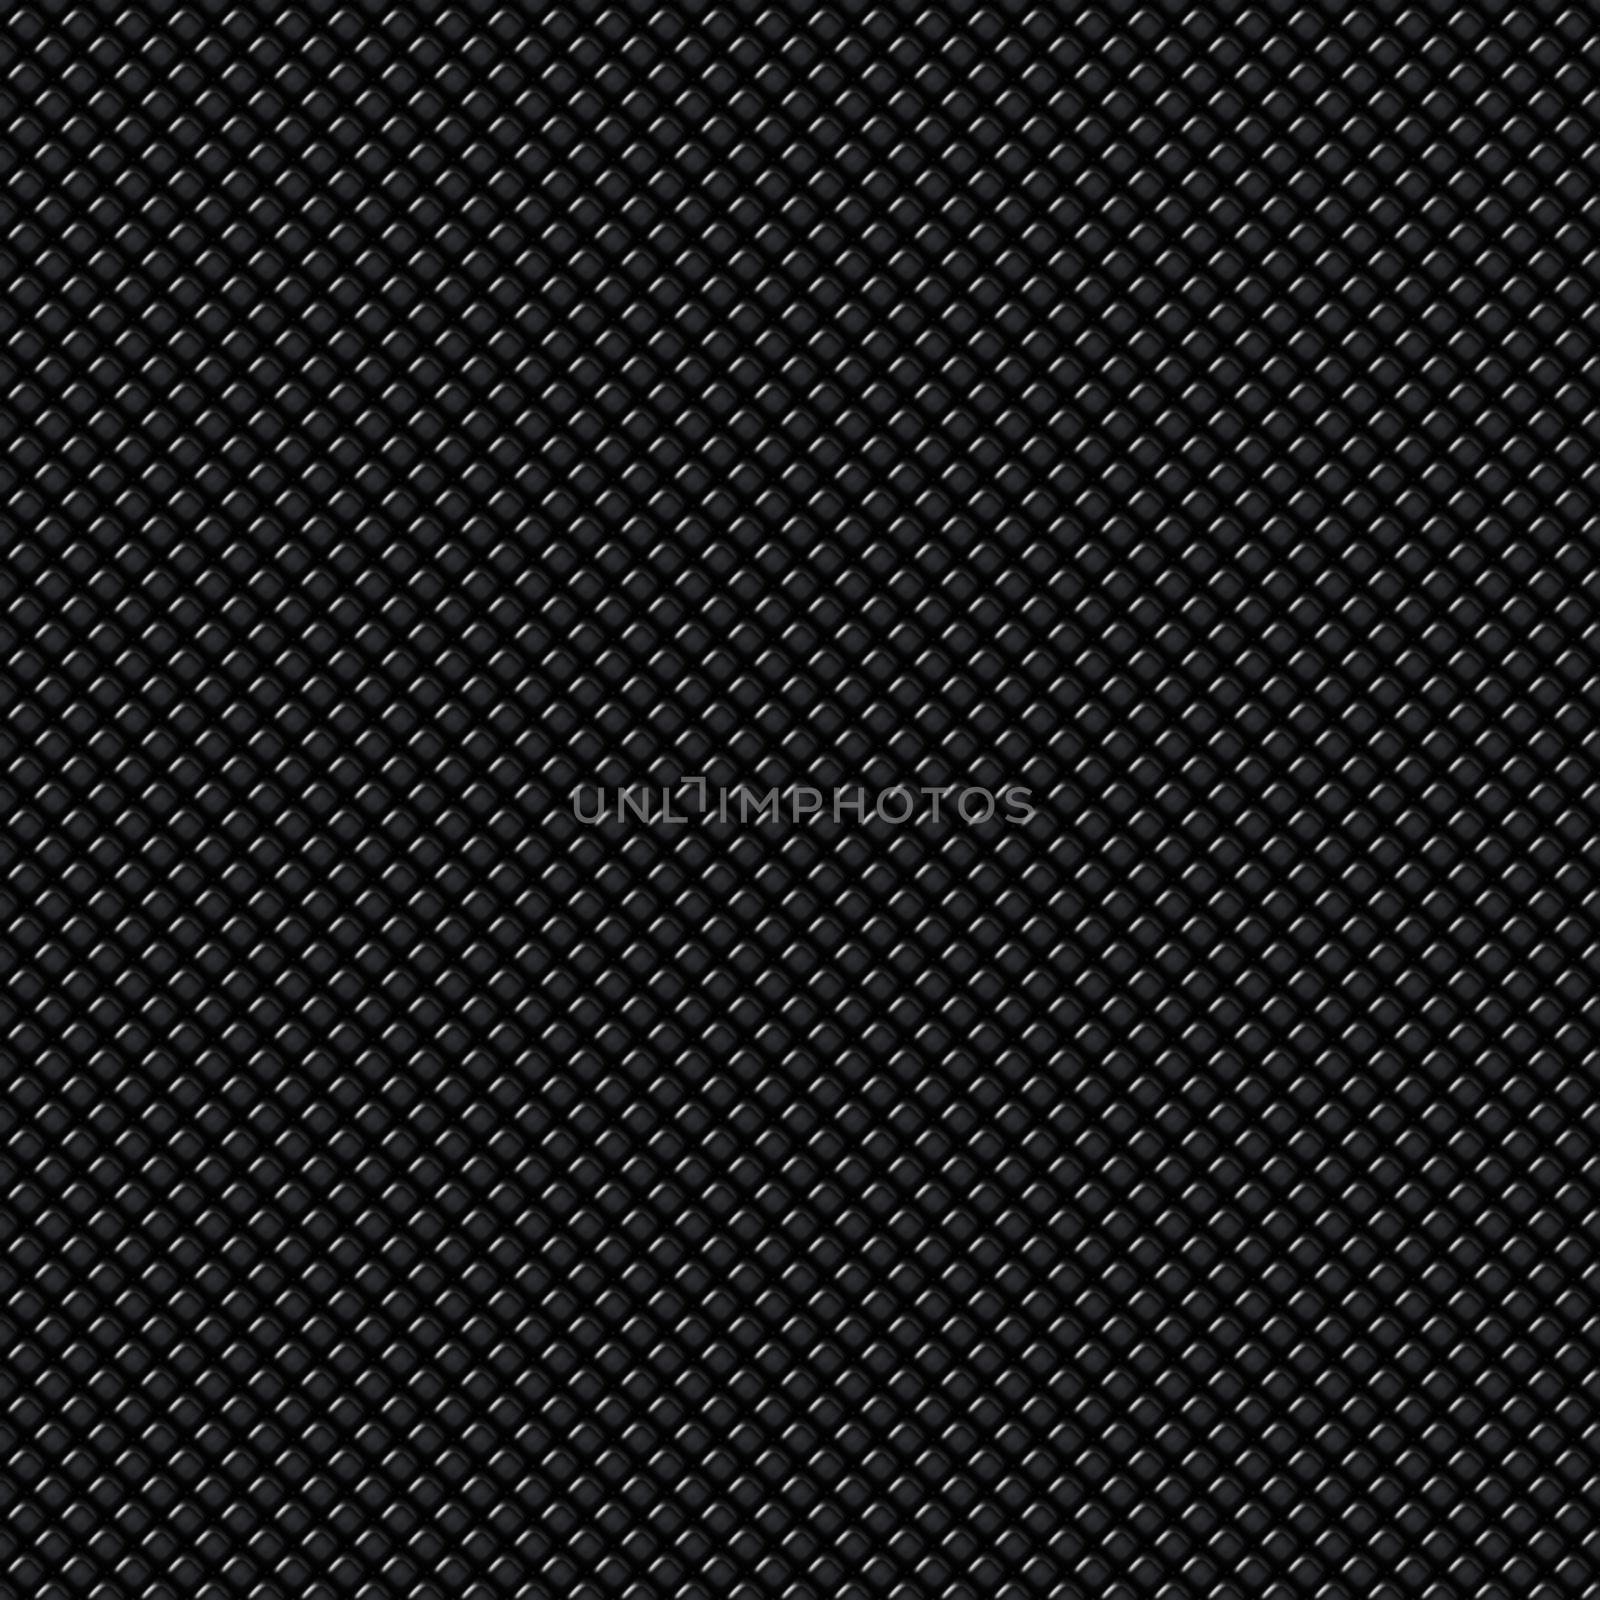 Highly detailed illustration of a carbon fiber background. Also could work as a black reptile or snake skin.